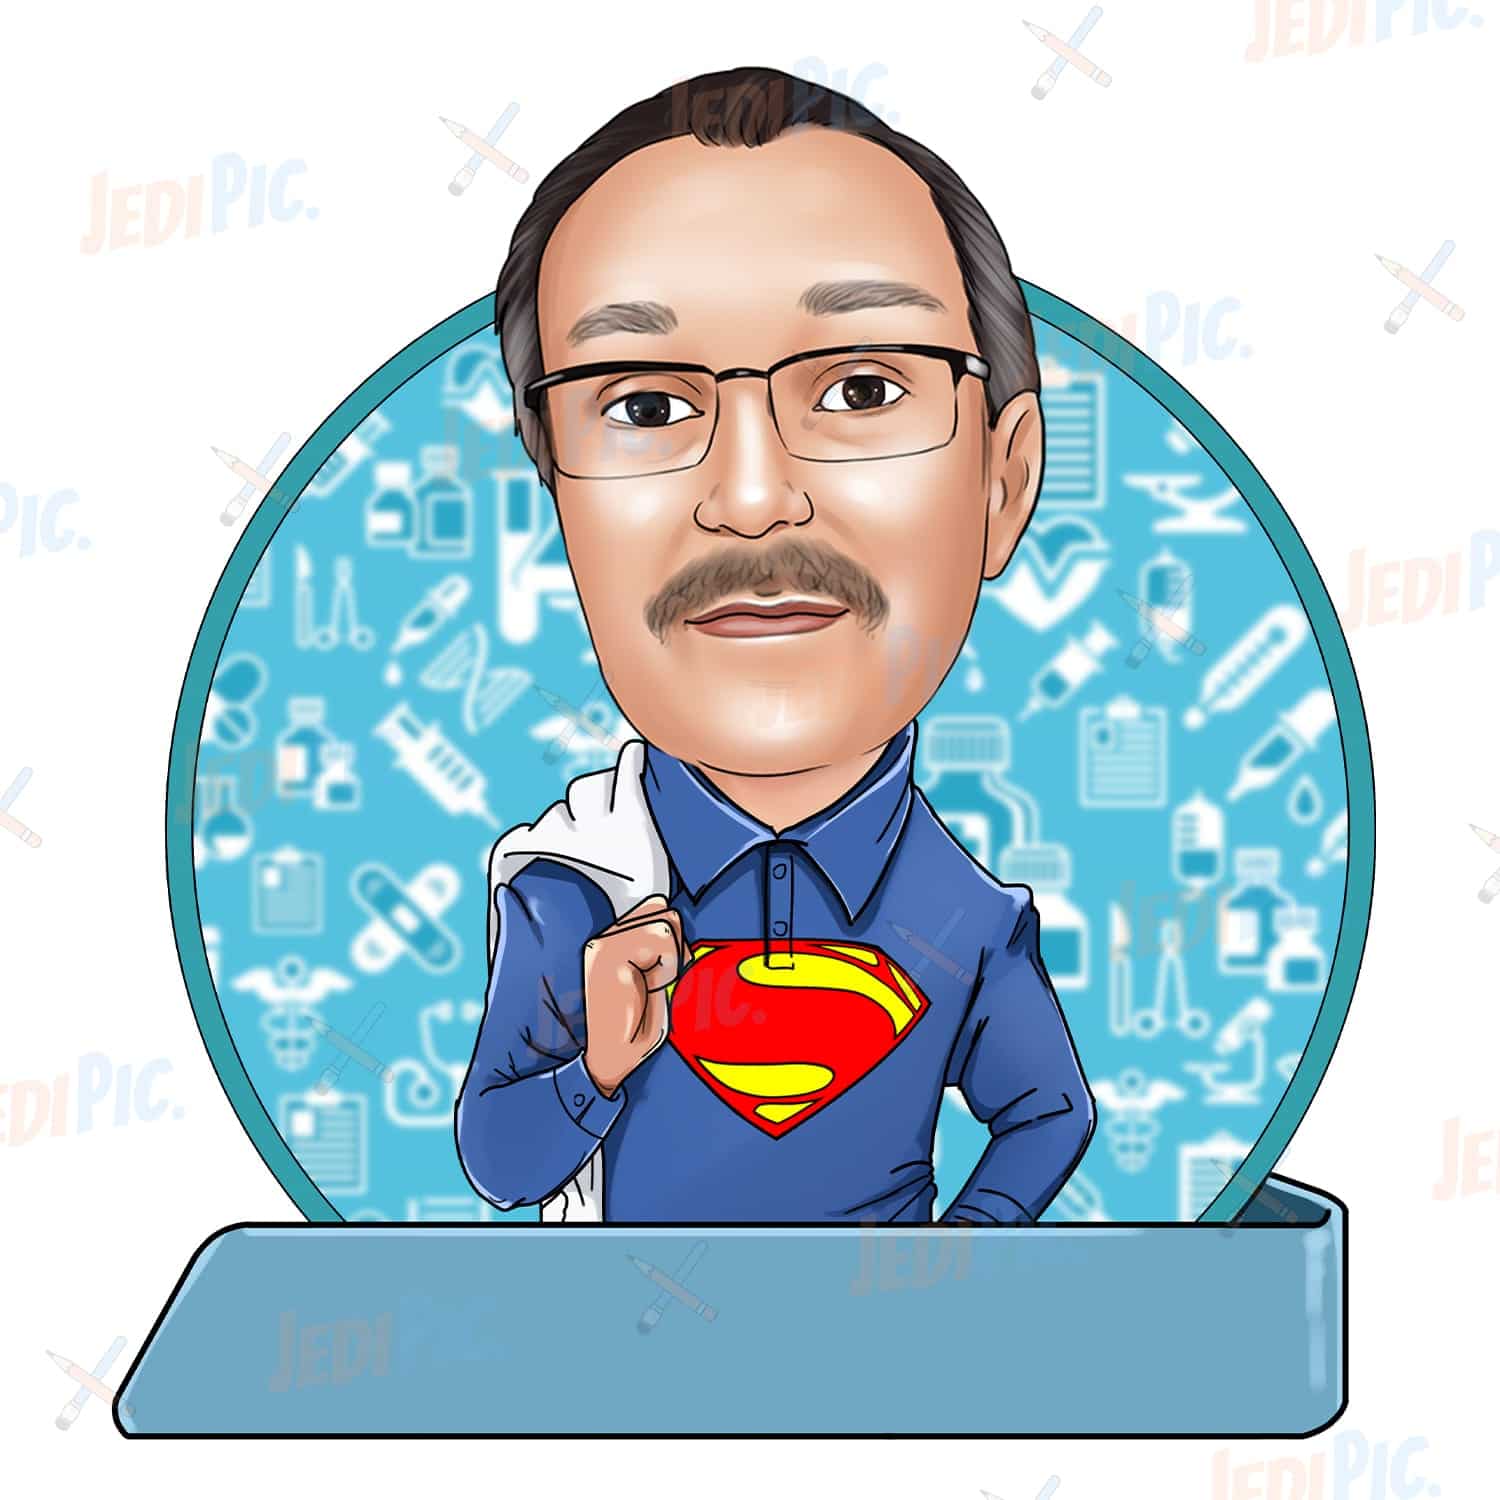 Get Your Own Superhero Portrait from your photo